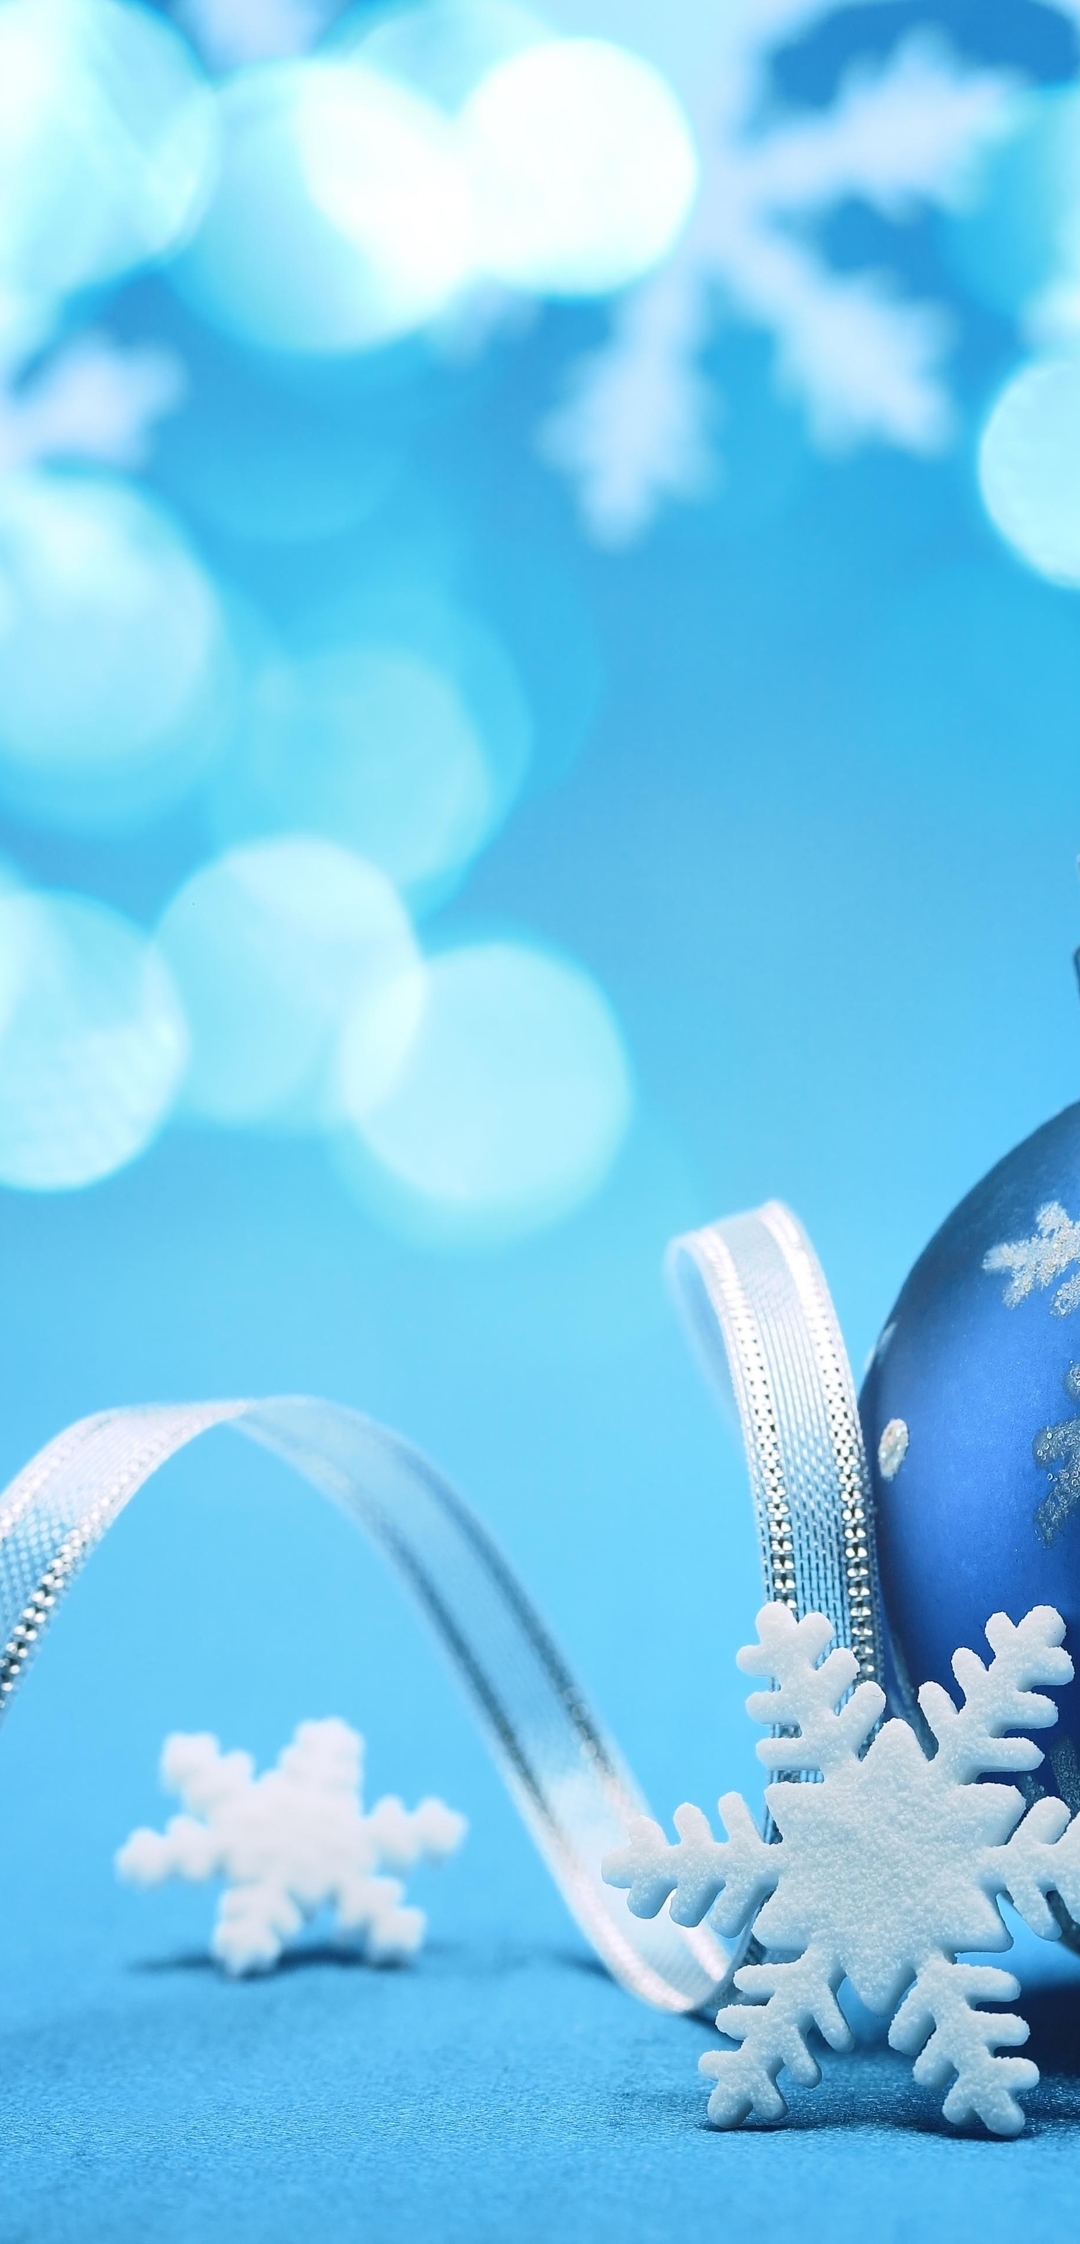 Image: New year, ball, toy, ribbon, blue background, snowflakes